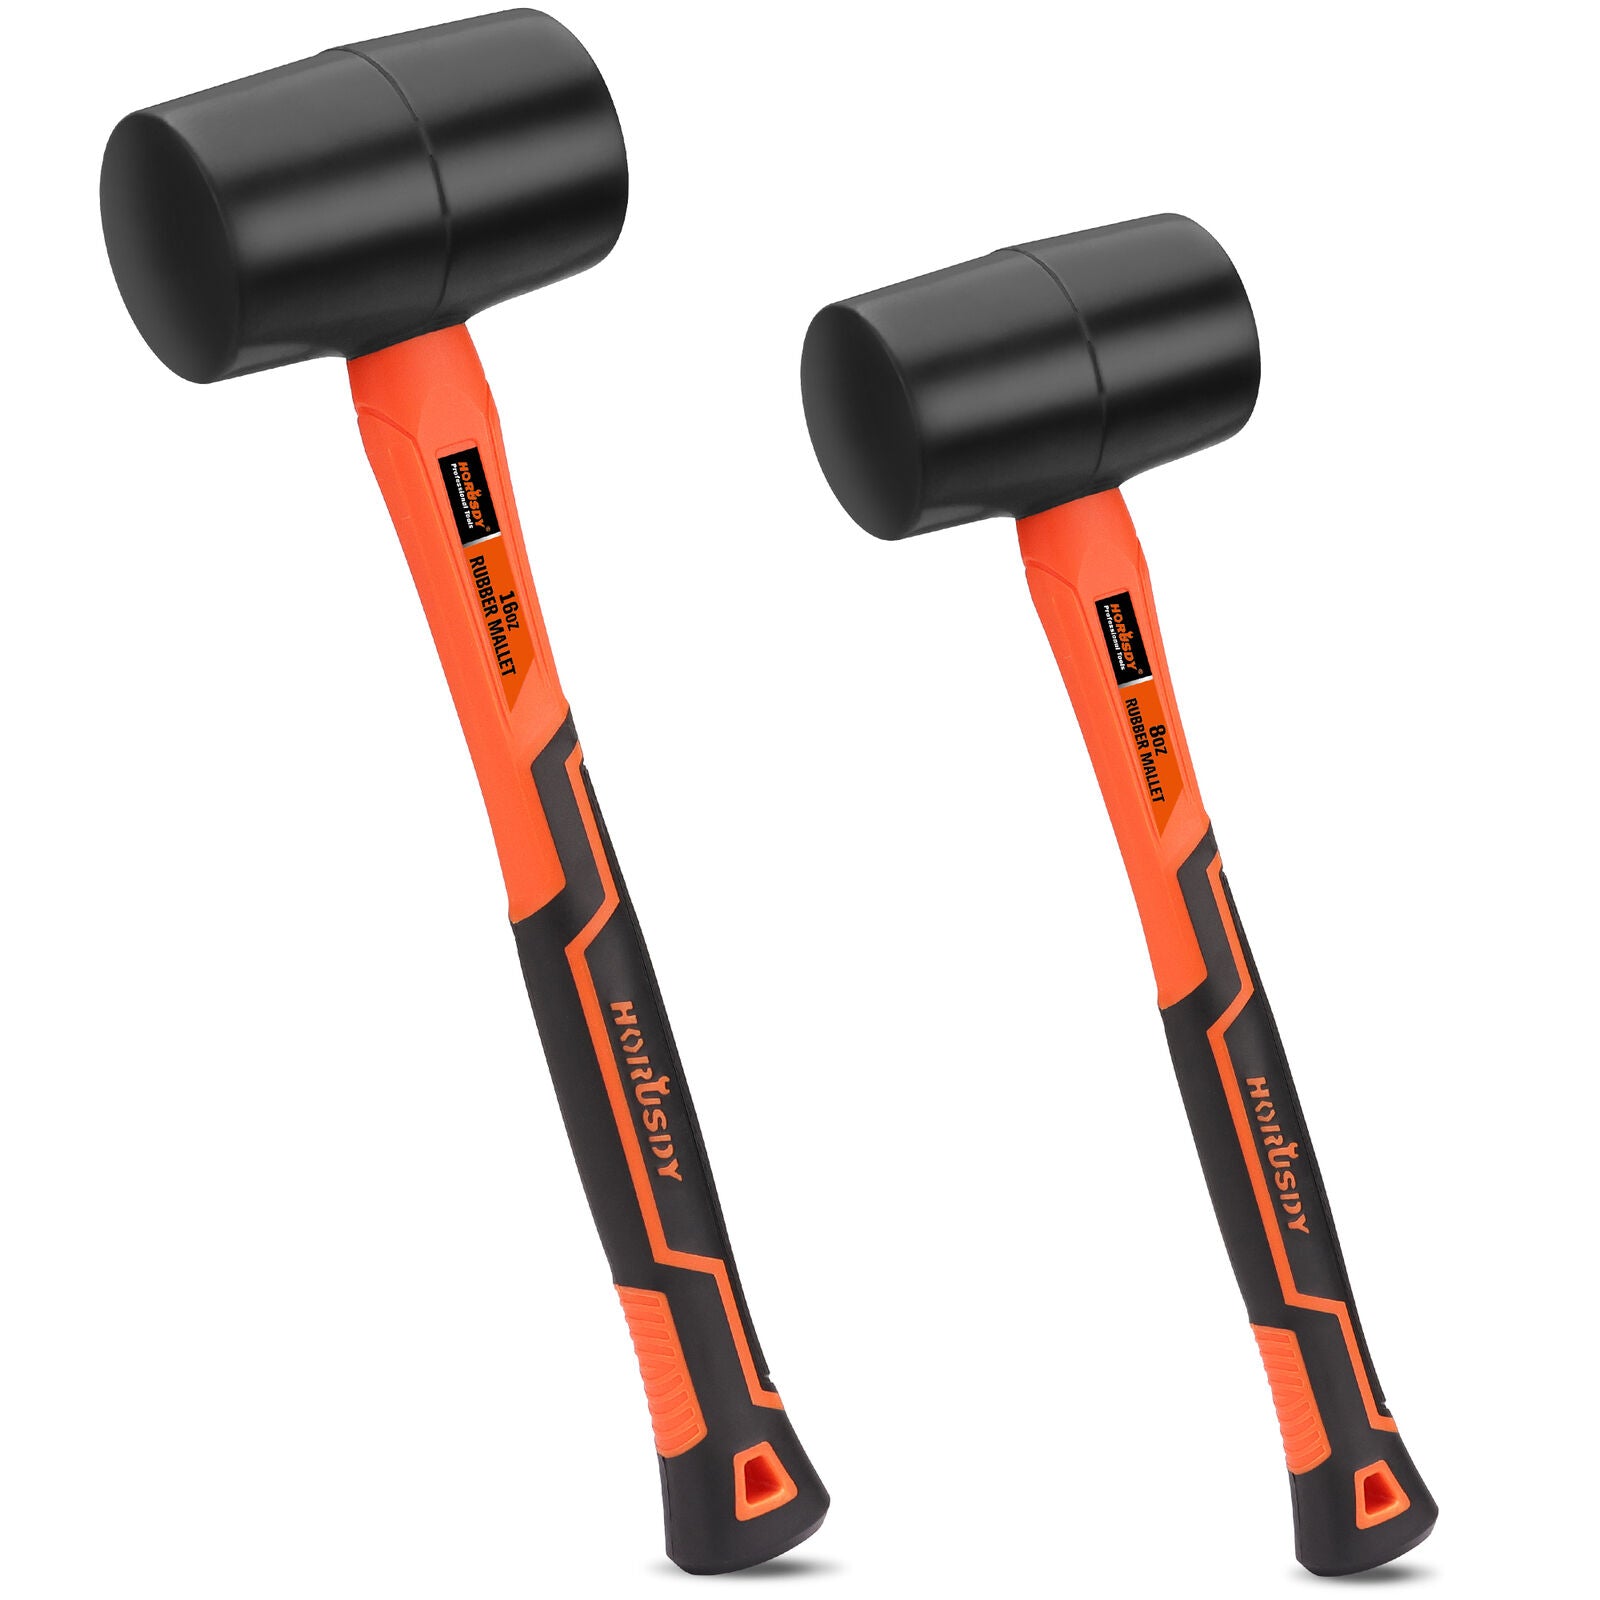 HORUSDY 2pcs Rubber Mallet Hammer Set with 8oz and 16oz Fiberglass Handles - Durable, Shock Absorbing, Wear-Resistant, Ideal for Woodworking and Camping